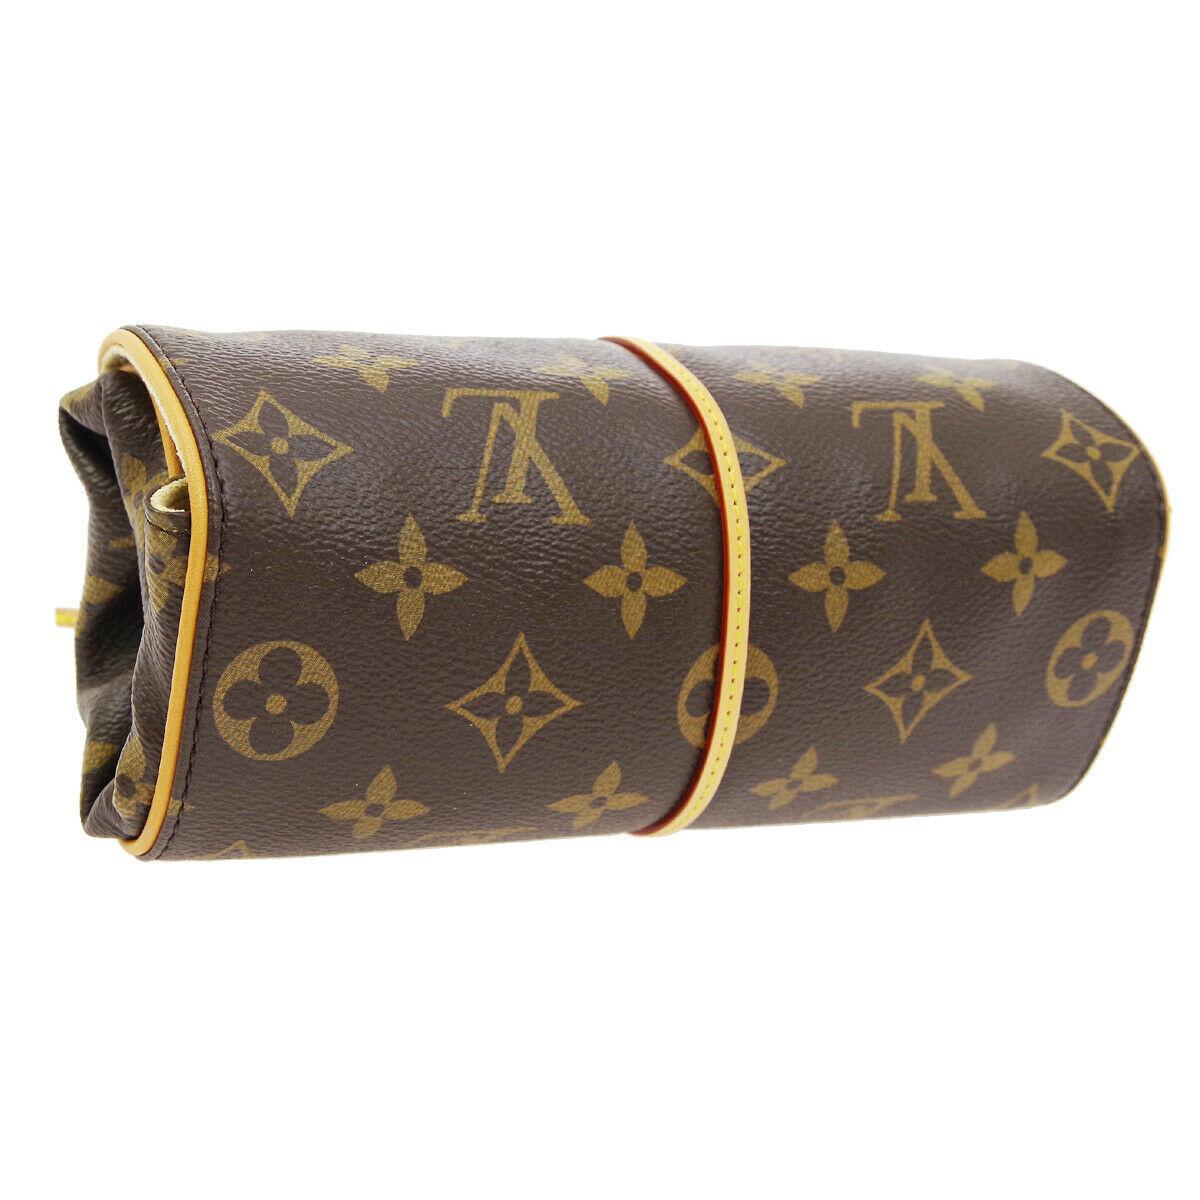 Louis Vuitton Monogram Canvas Men's Women's Travel Jewelry Storage Roll 

Monogram canvas
Leather 
Gold tone hardware 
Velvet lining
Tie closure
Date code present
Made in France
Measures 8